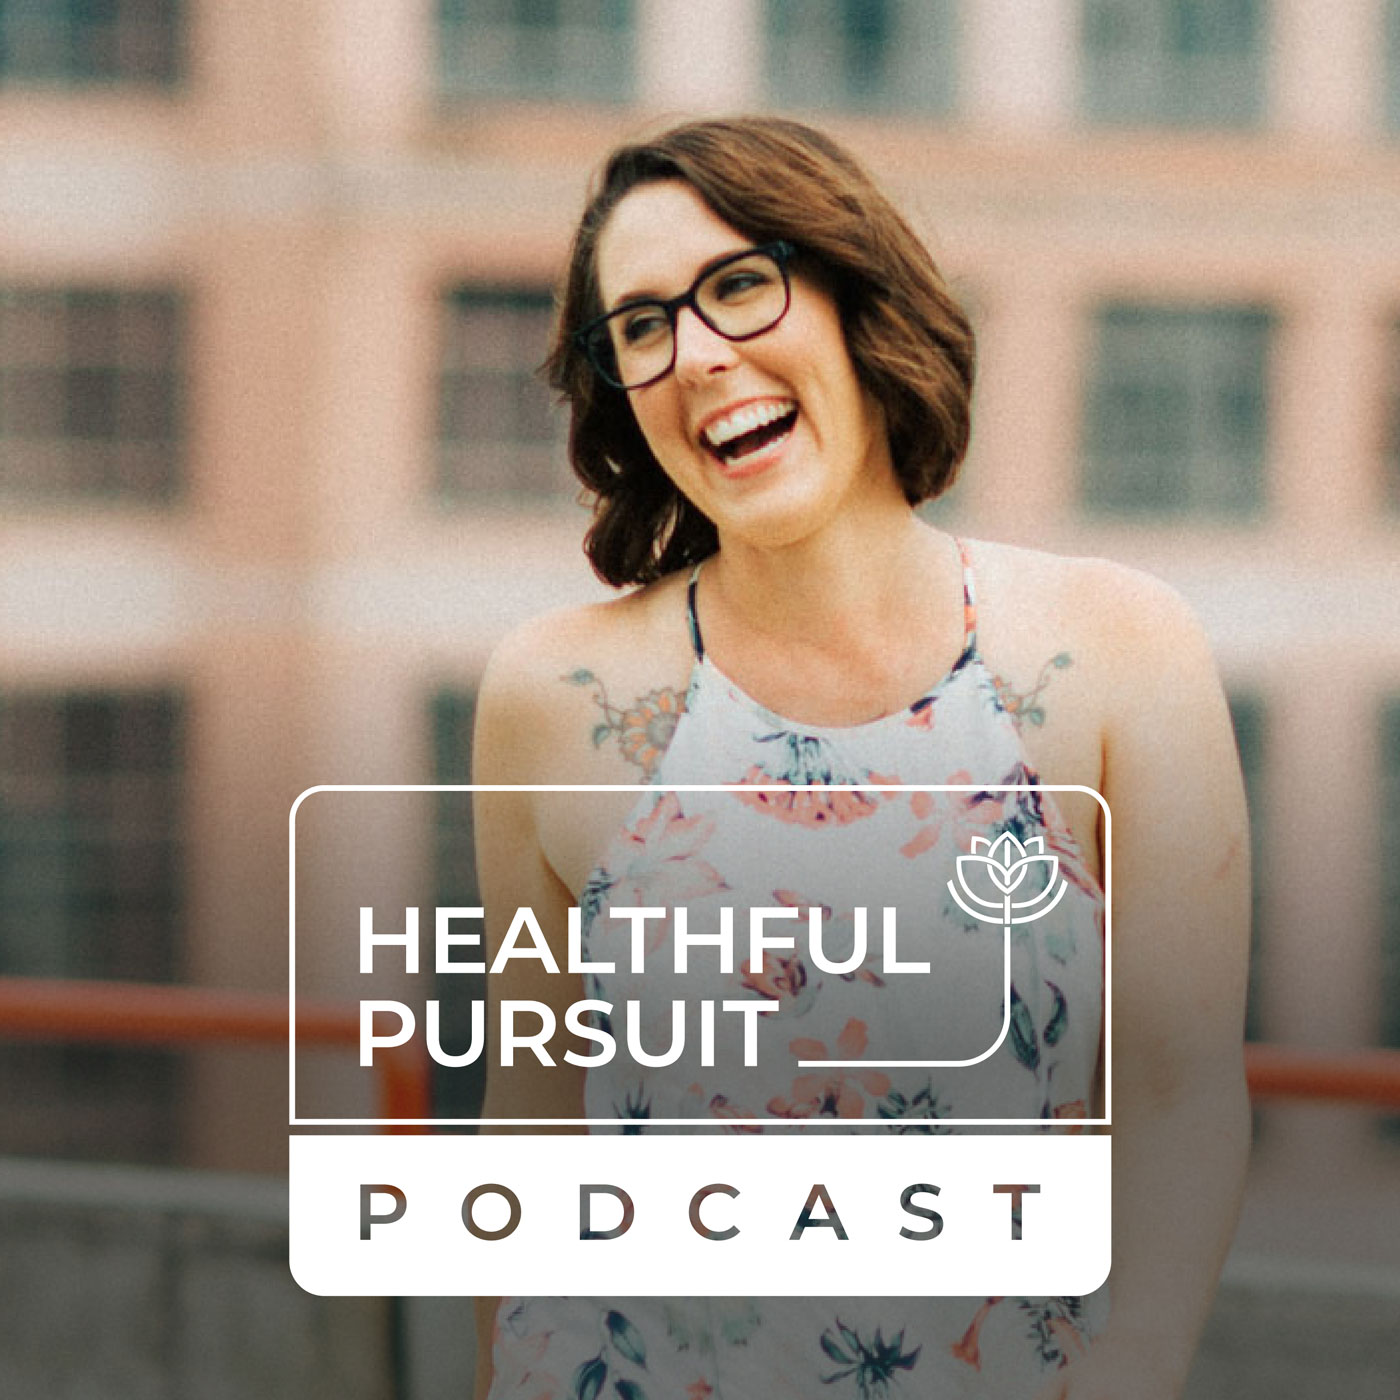 The Healthful Pursuit Podcast with Leanne Vogel